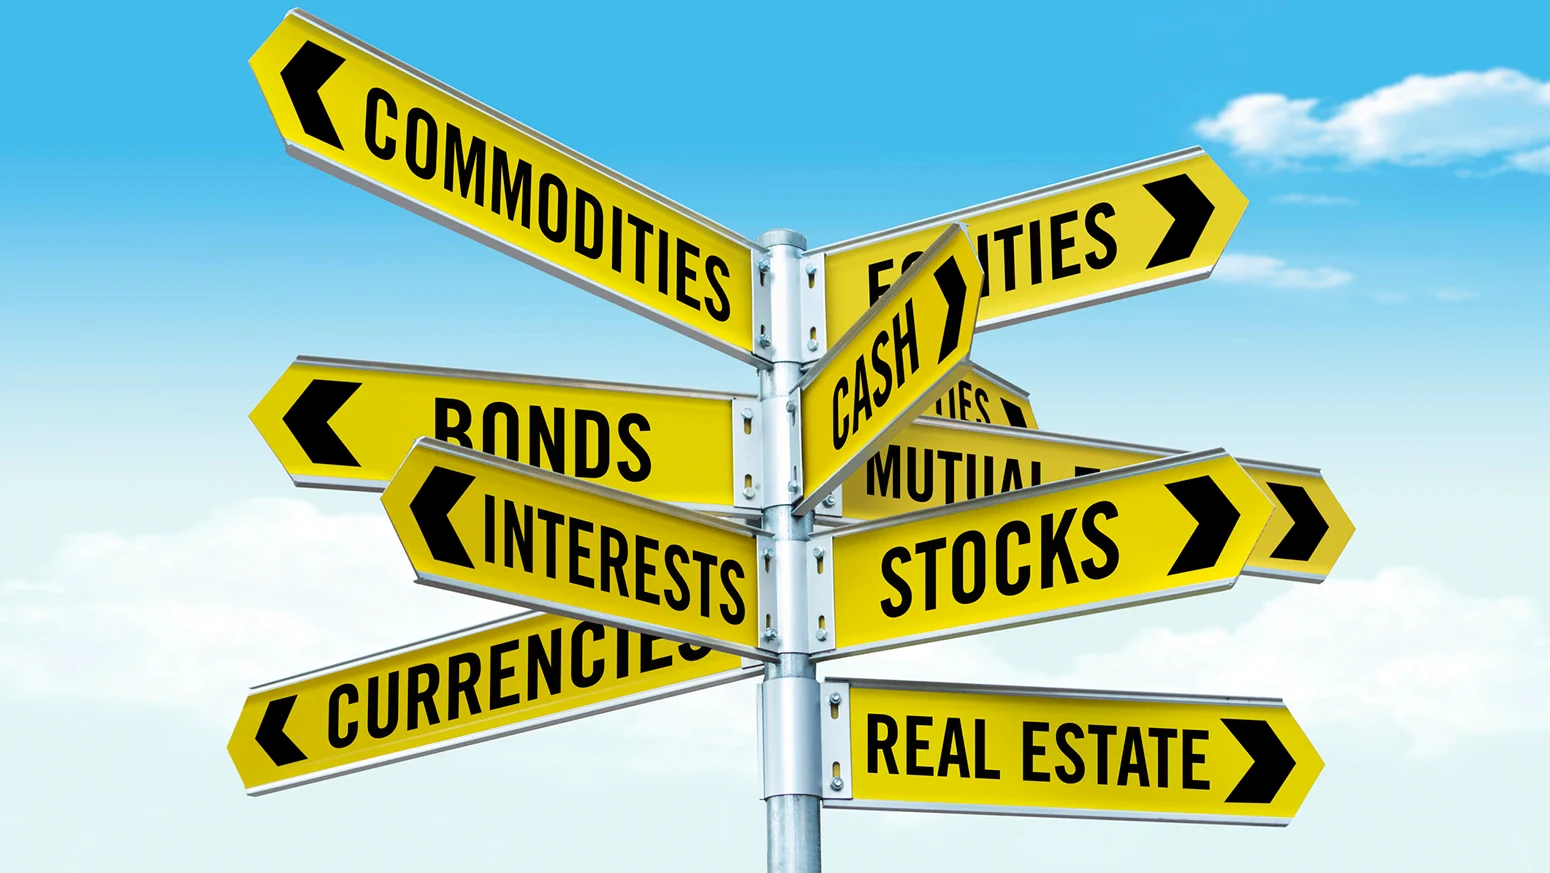 Alternative Investments: What They Are and Why You Should Consider Them